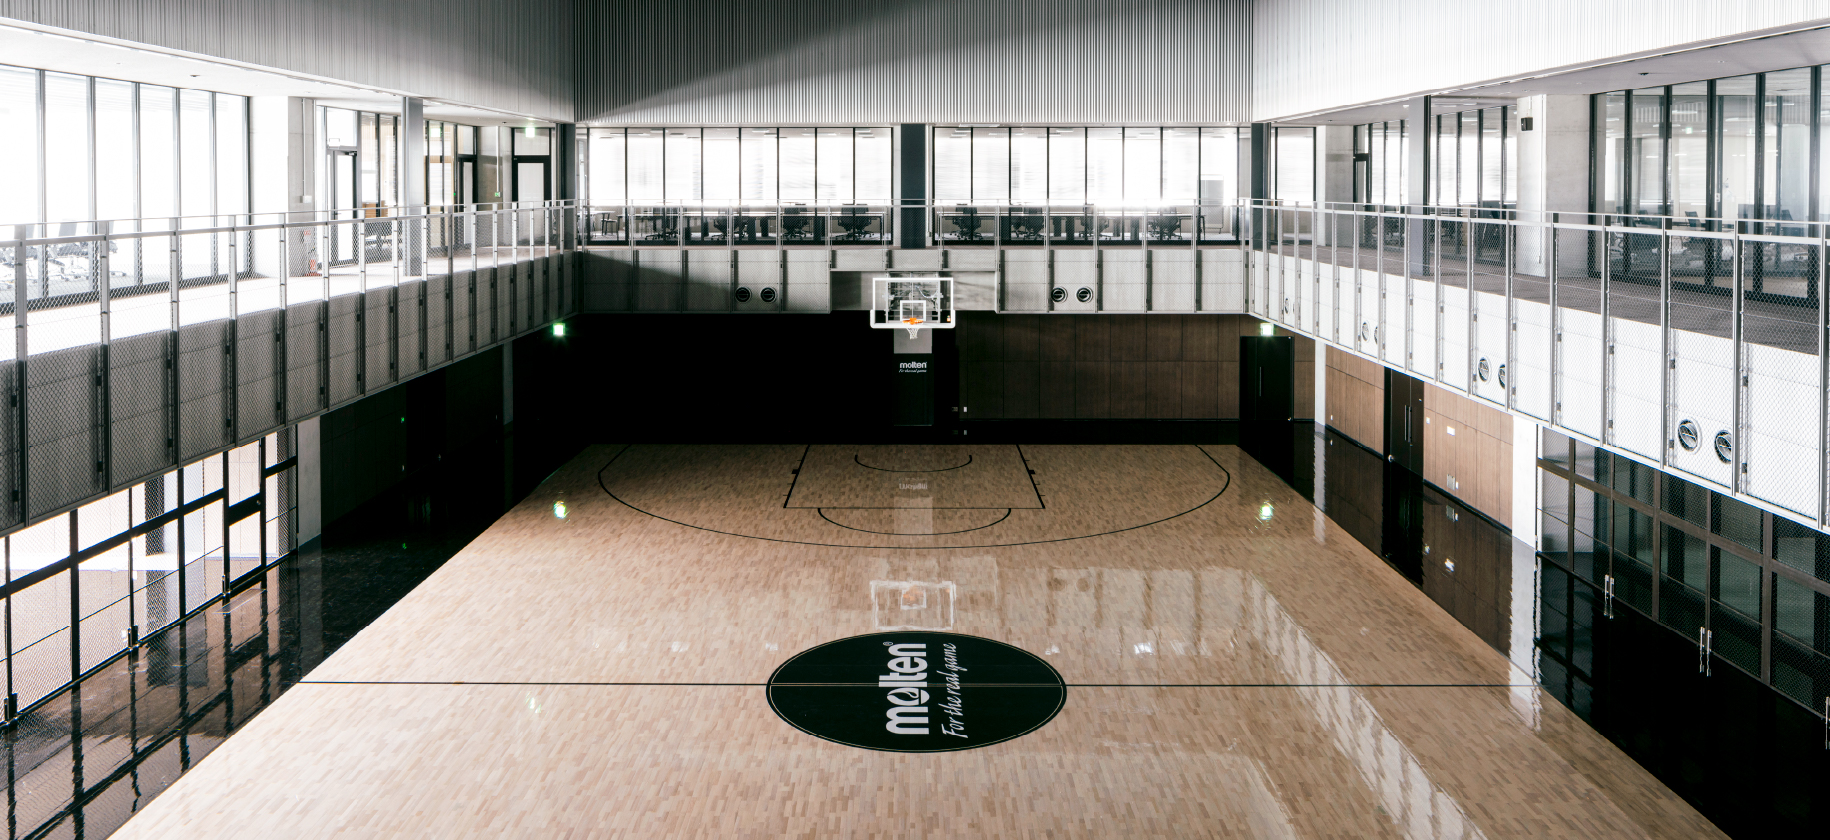 the court